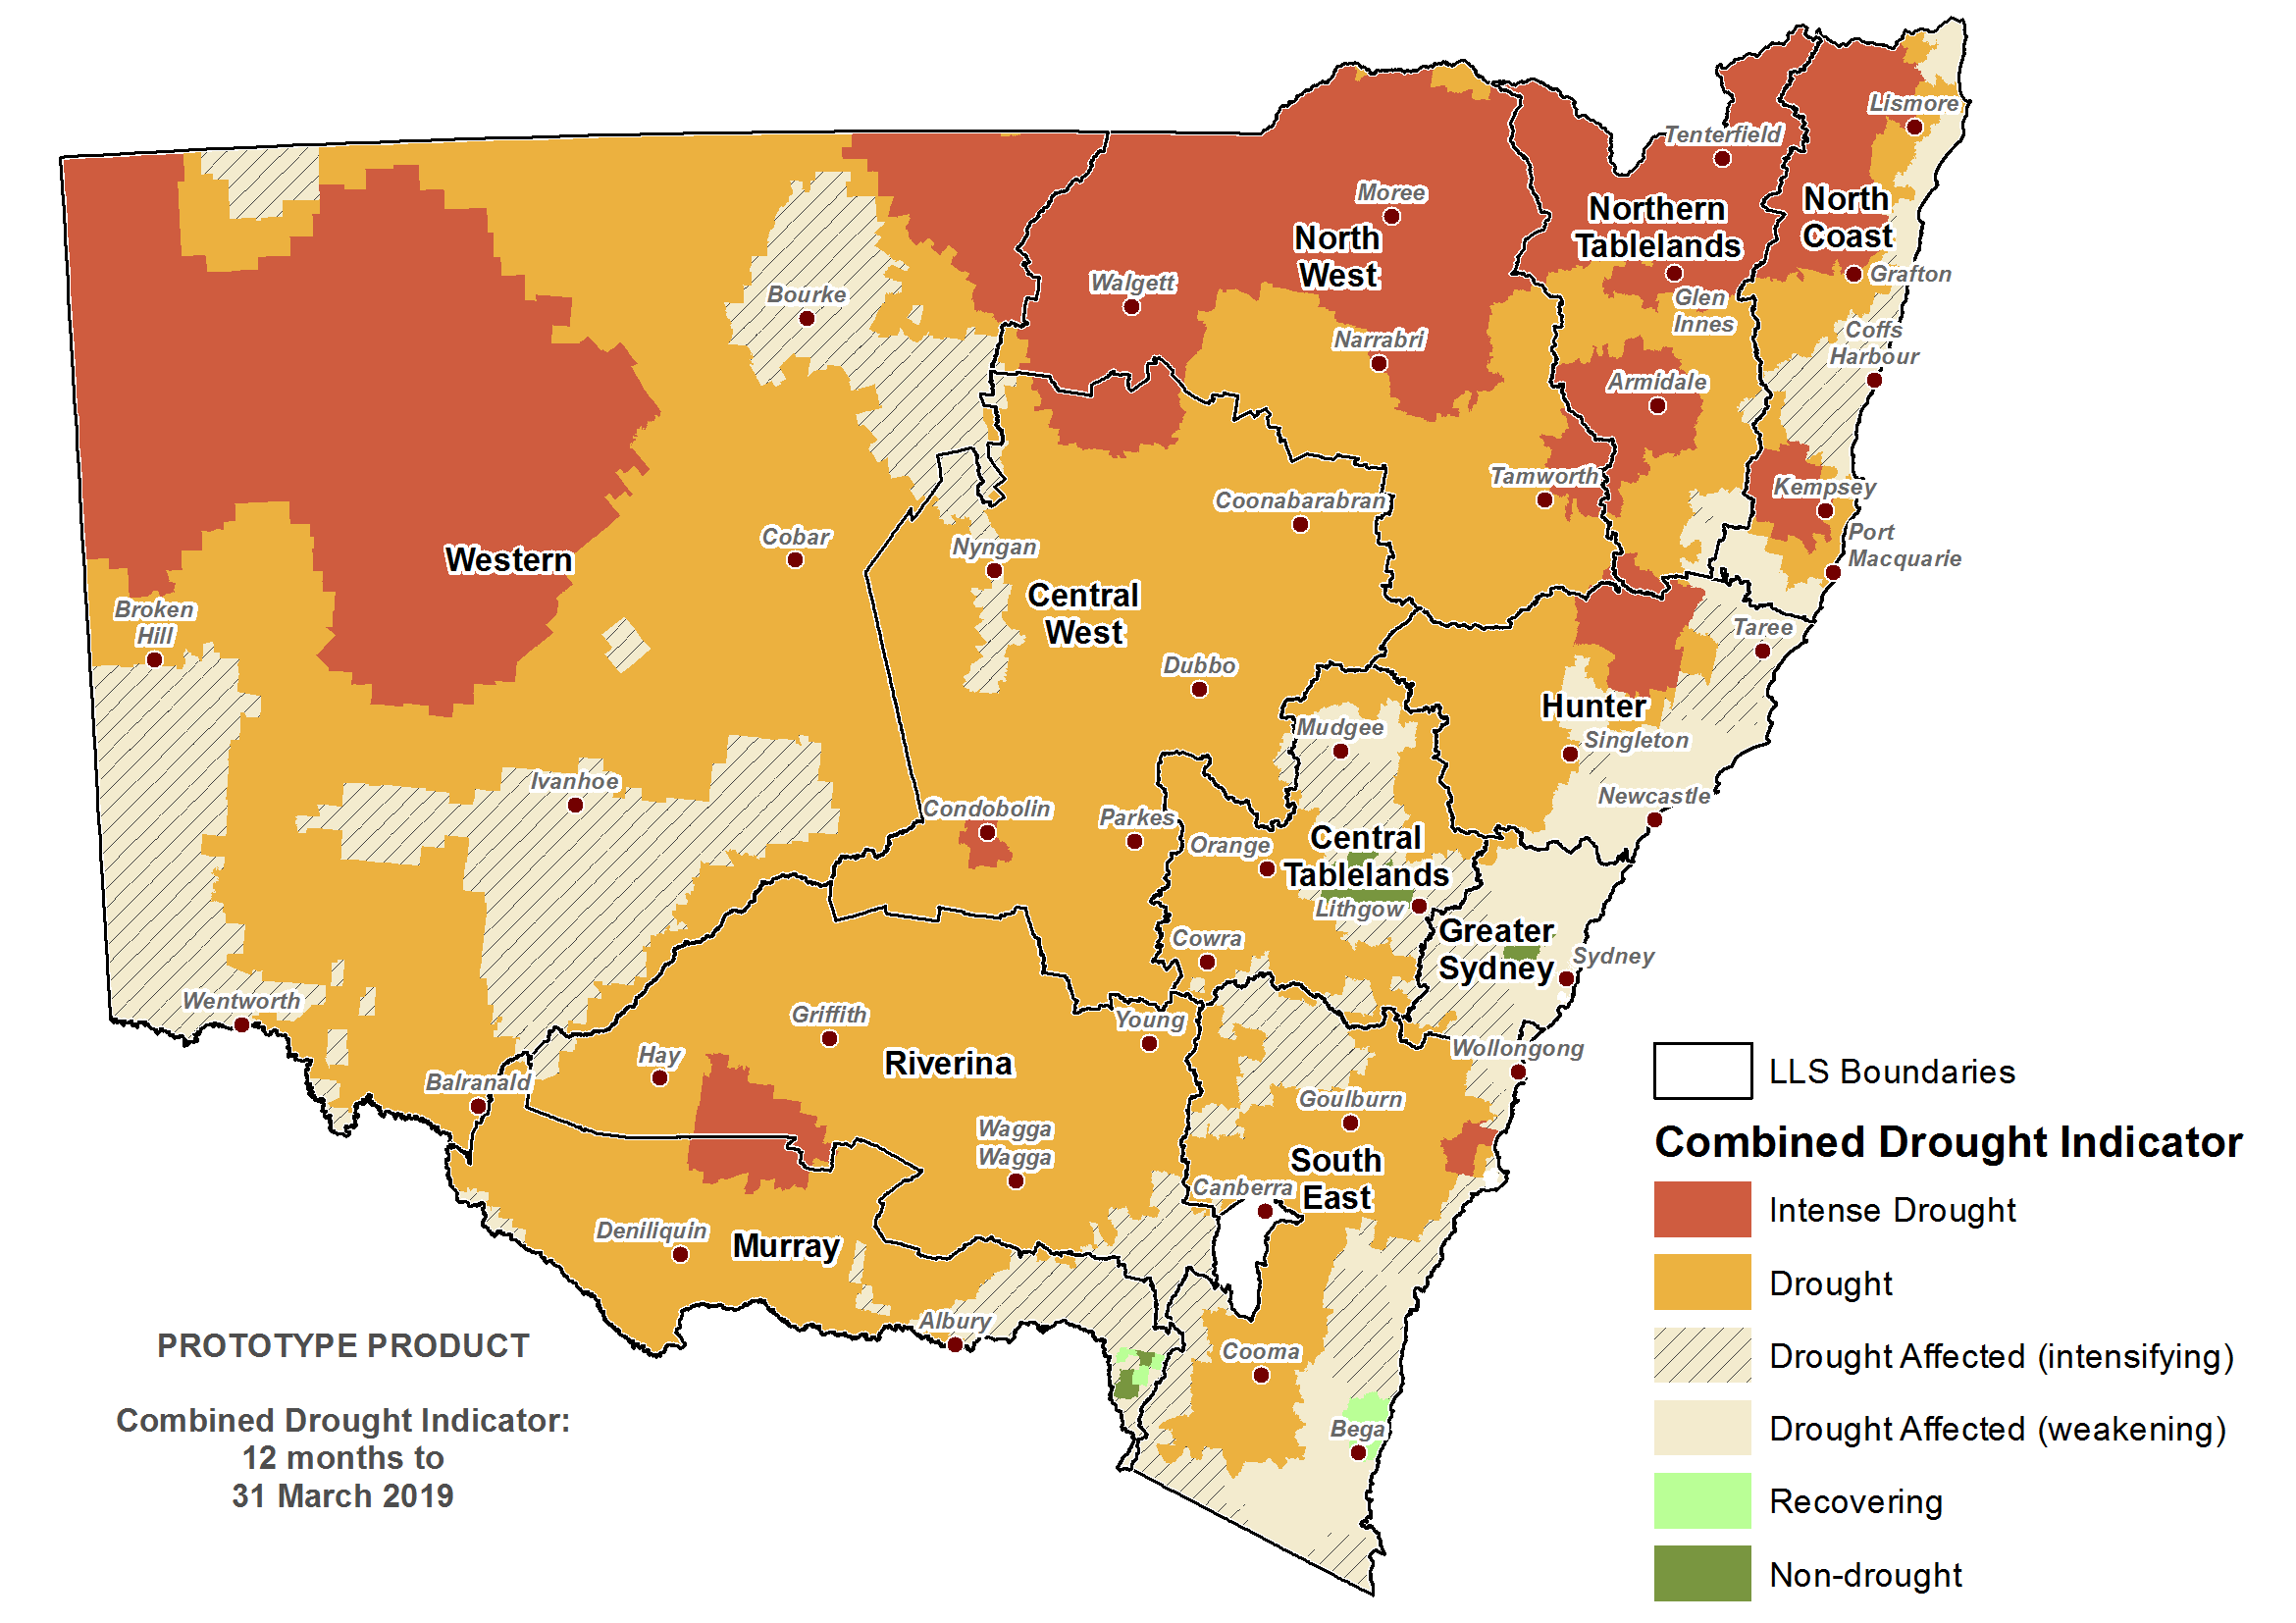 Description of the Combined Drought Indicator (CDI) framework - For an accessible explanation of this image contact scott.wallace@dpi.nsw.gov.au